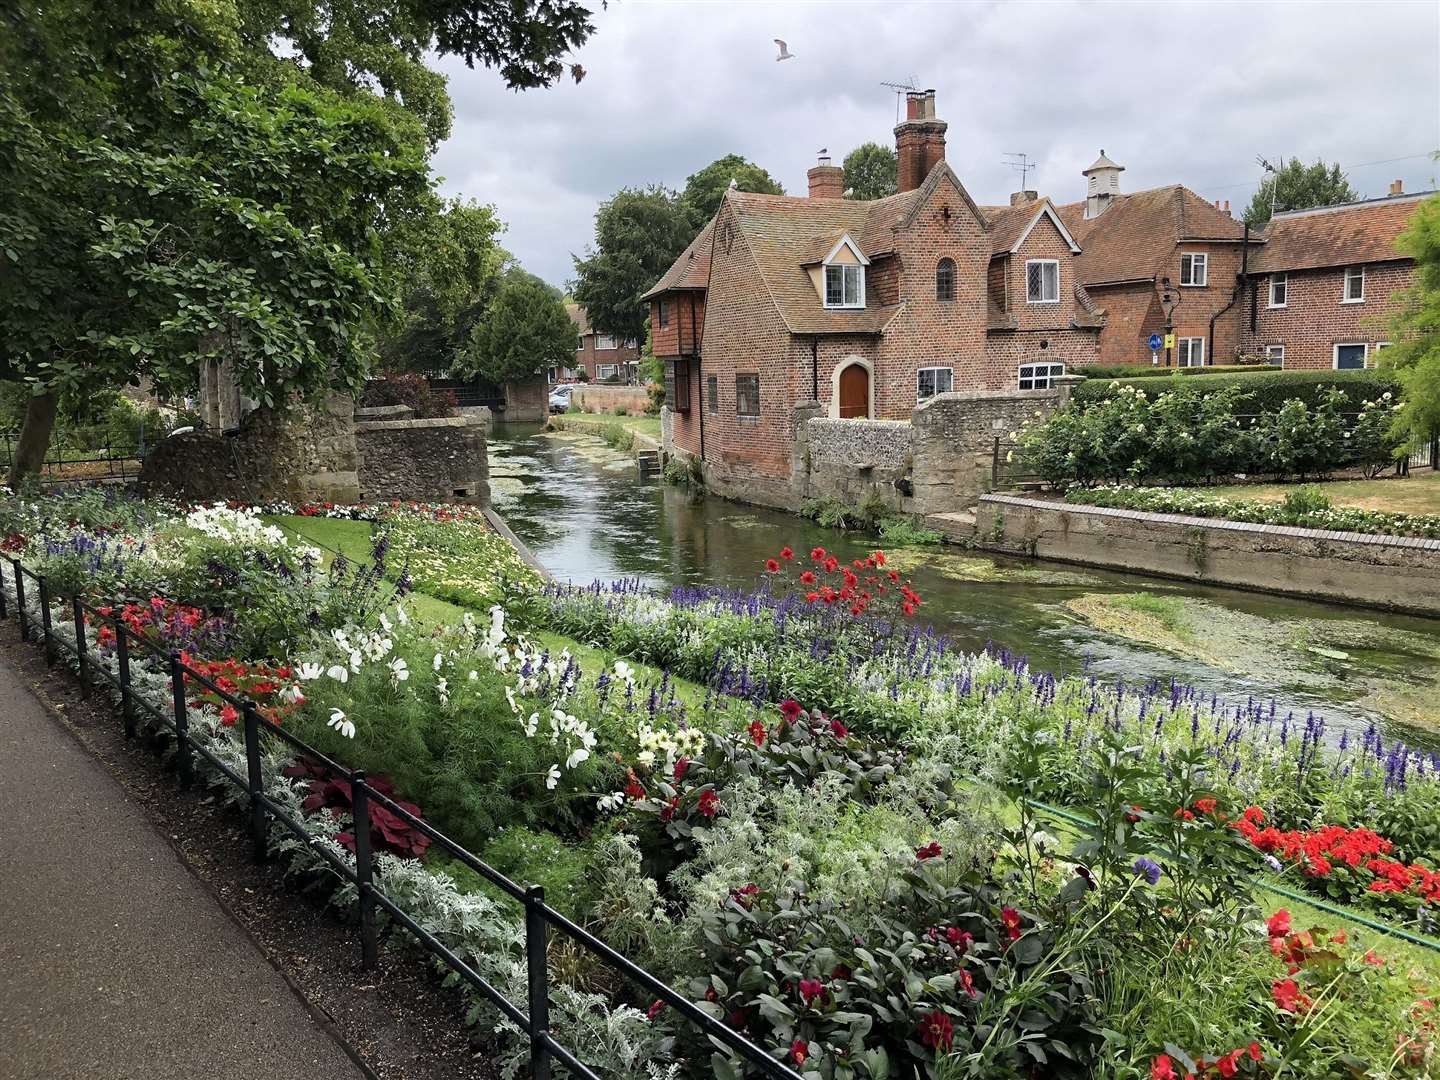 The colourful Westgate Gardens in full bloom